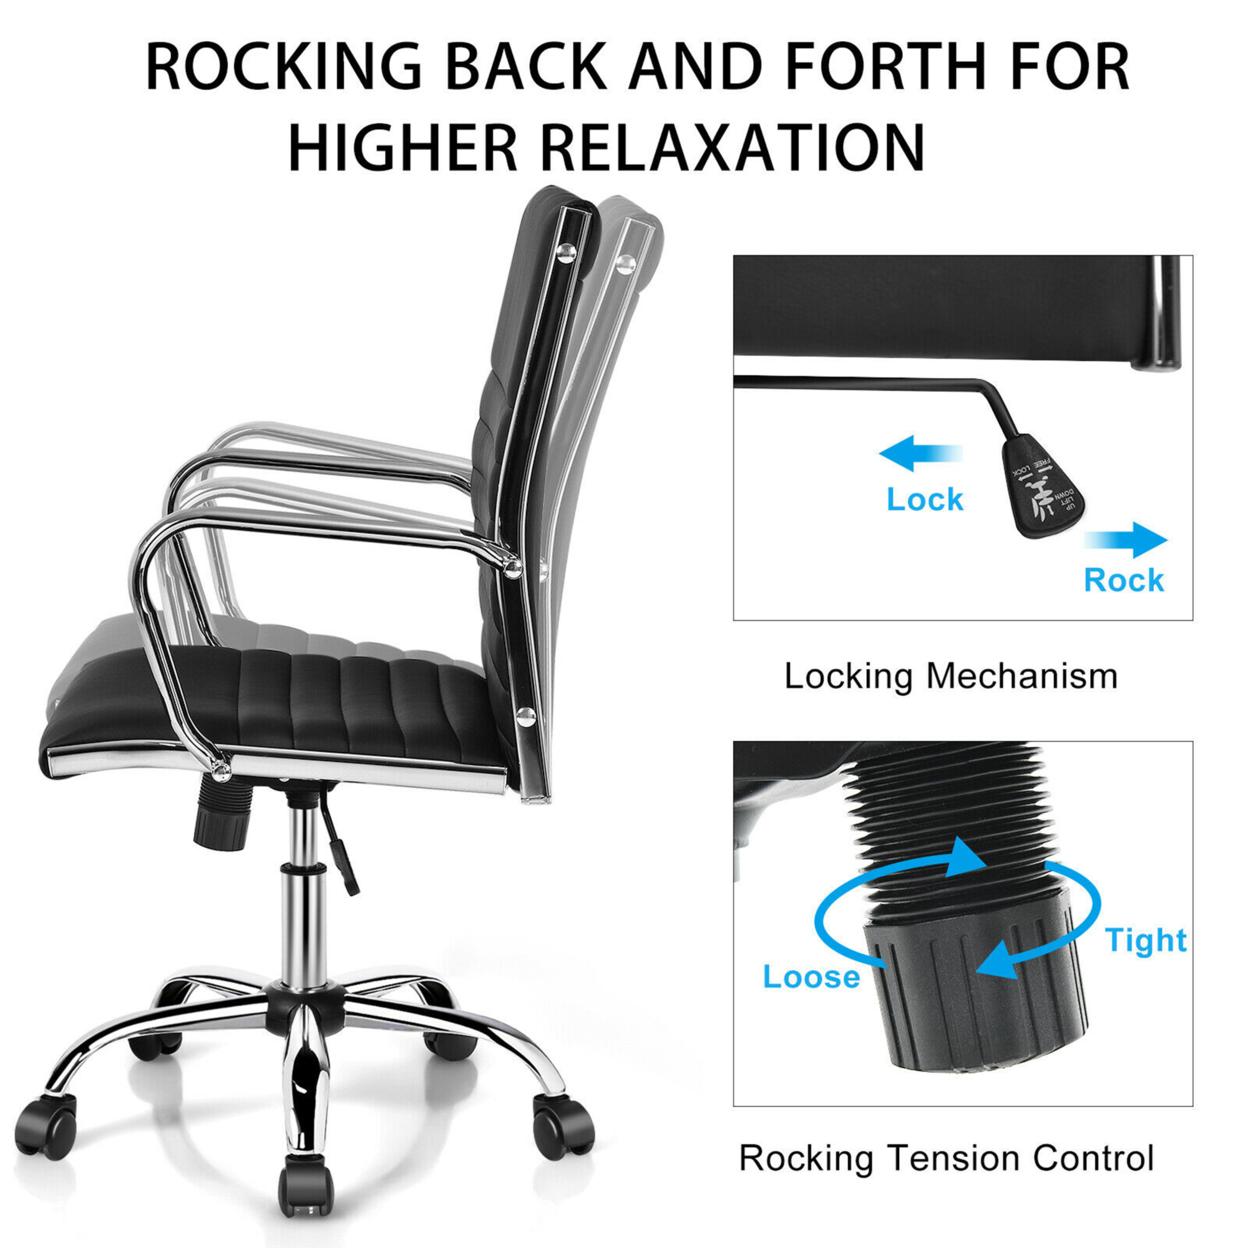 PU Leather Office Chair High Back Conference Task Chair W/Armrests - Black, 2 PCS